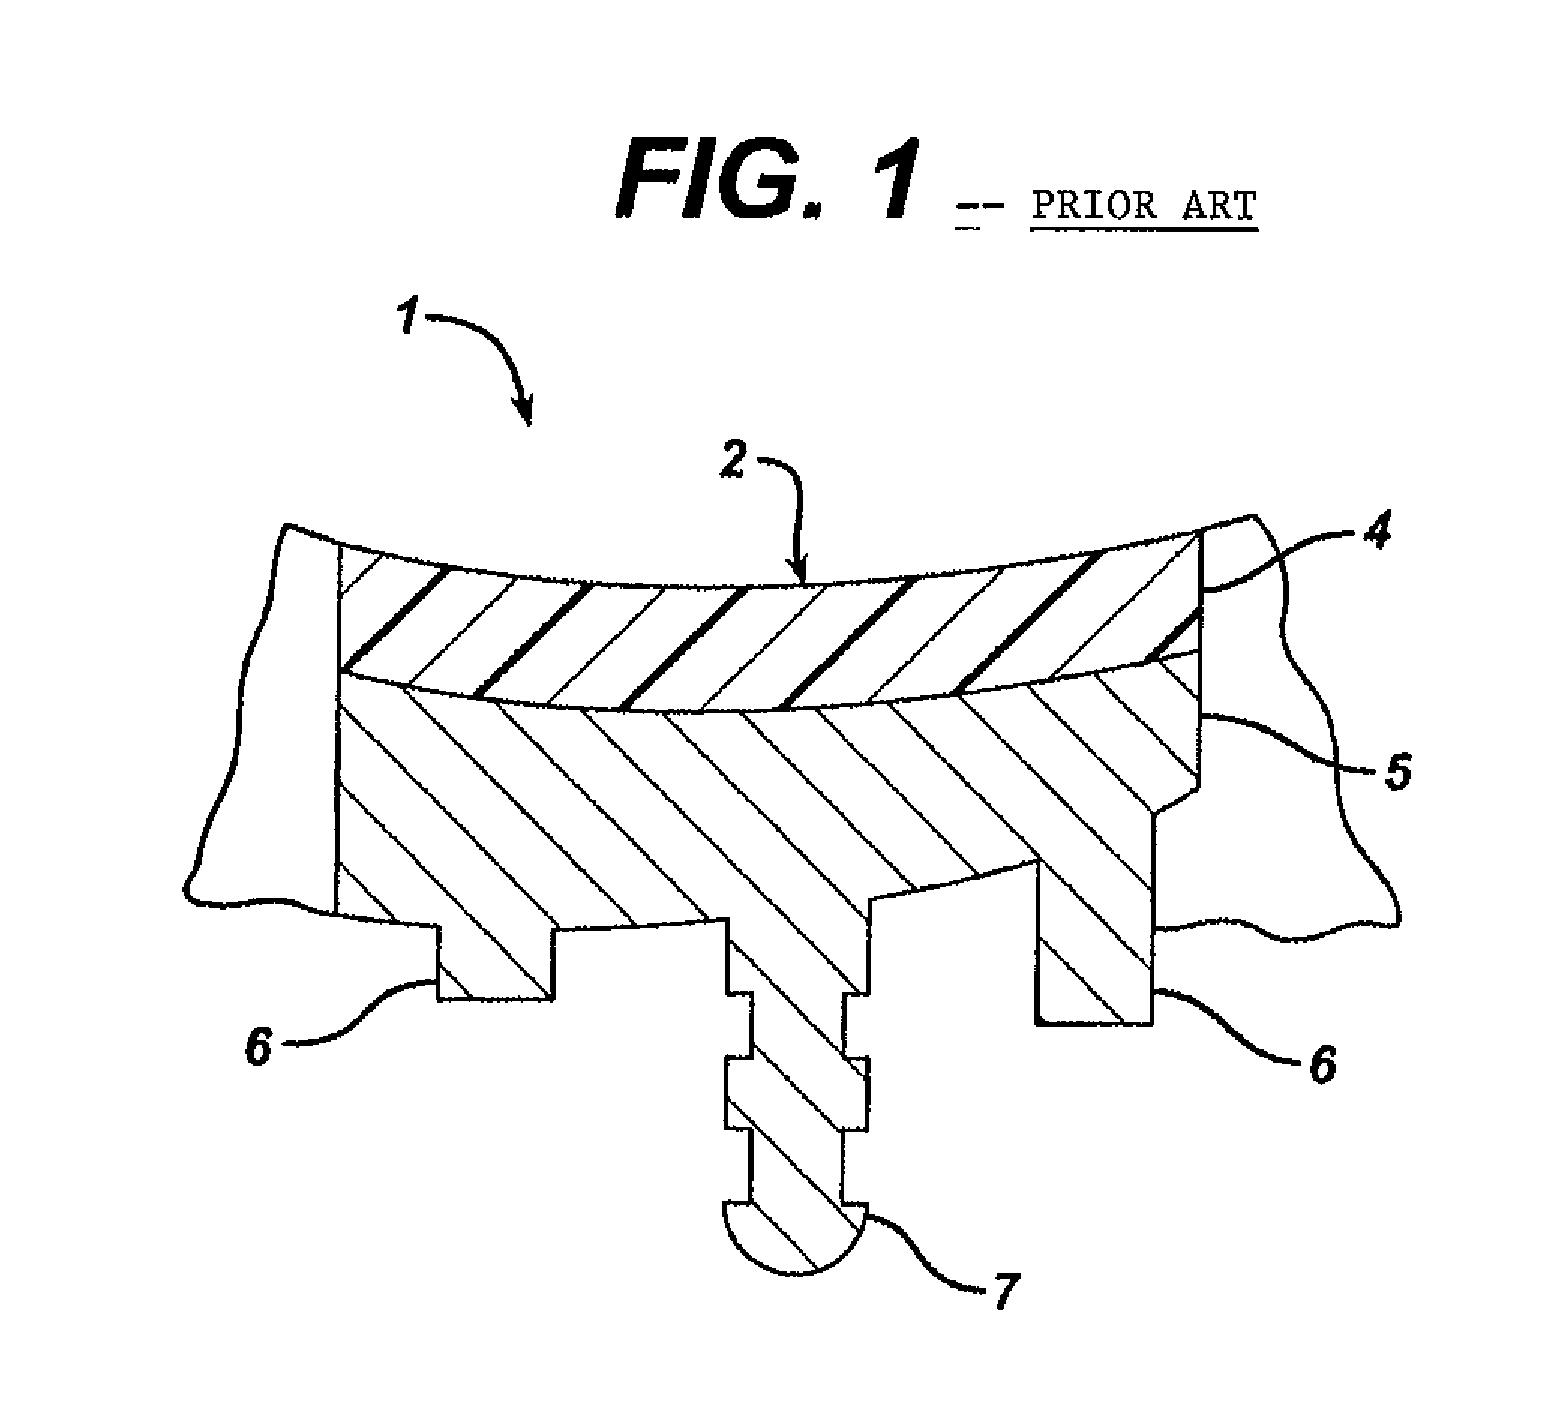 Instrument for preparing an implant support surface and associated method